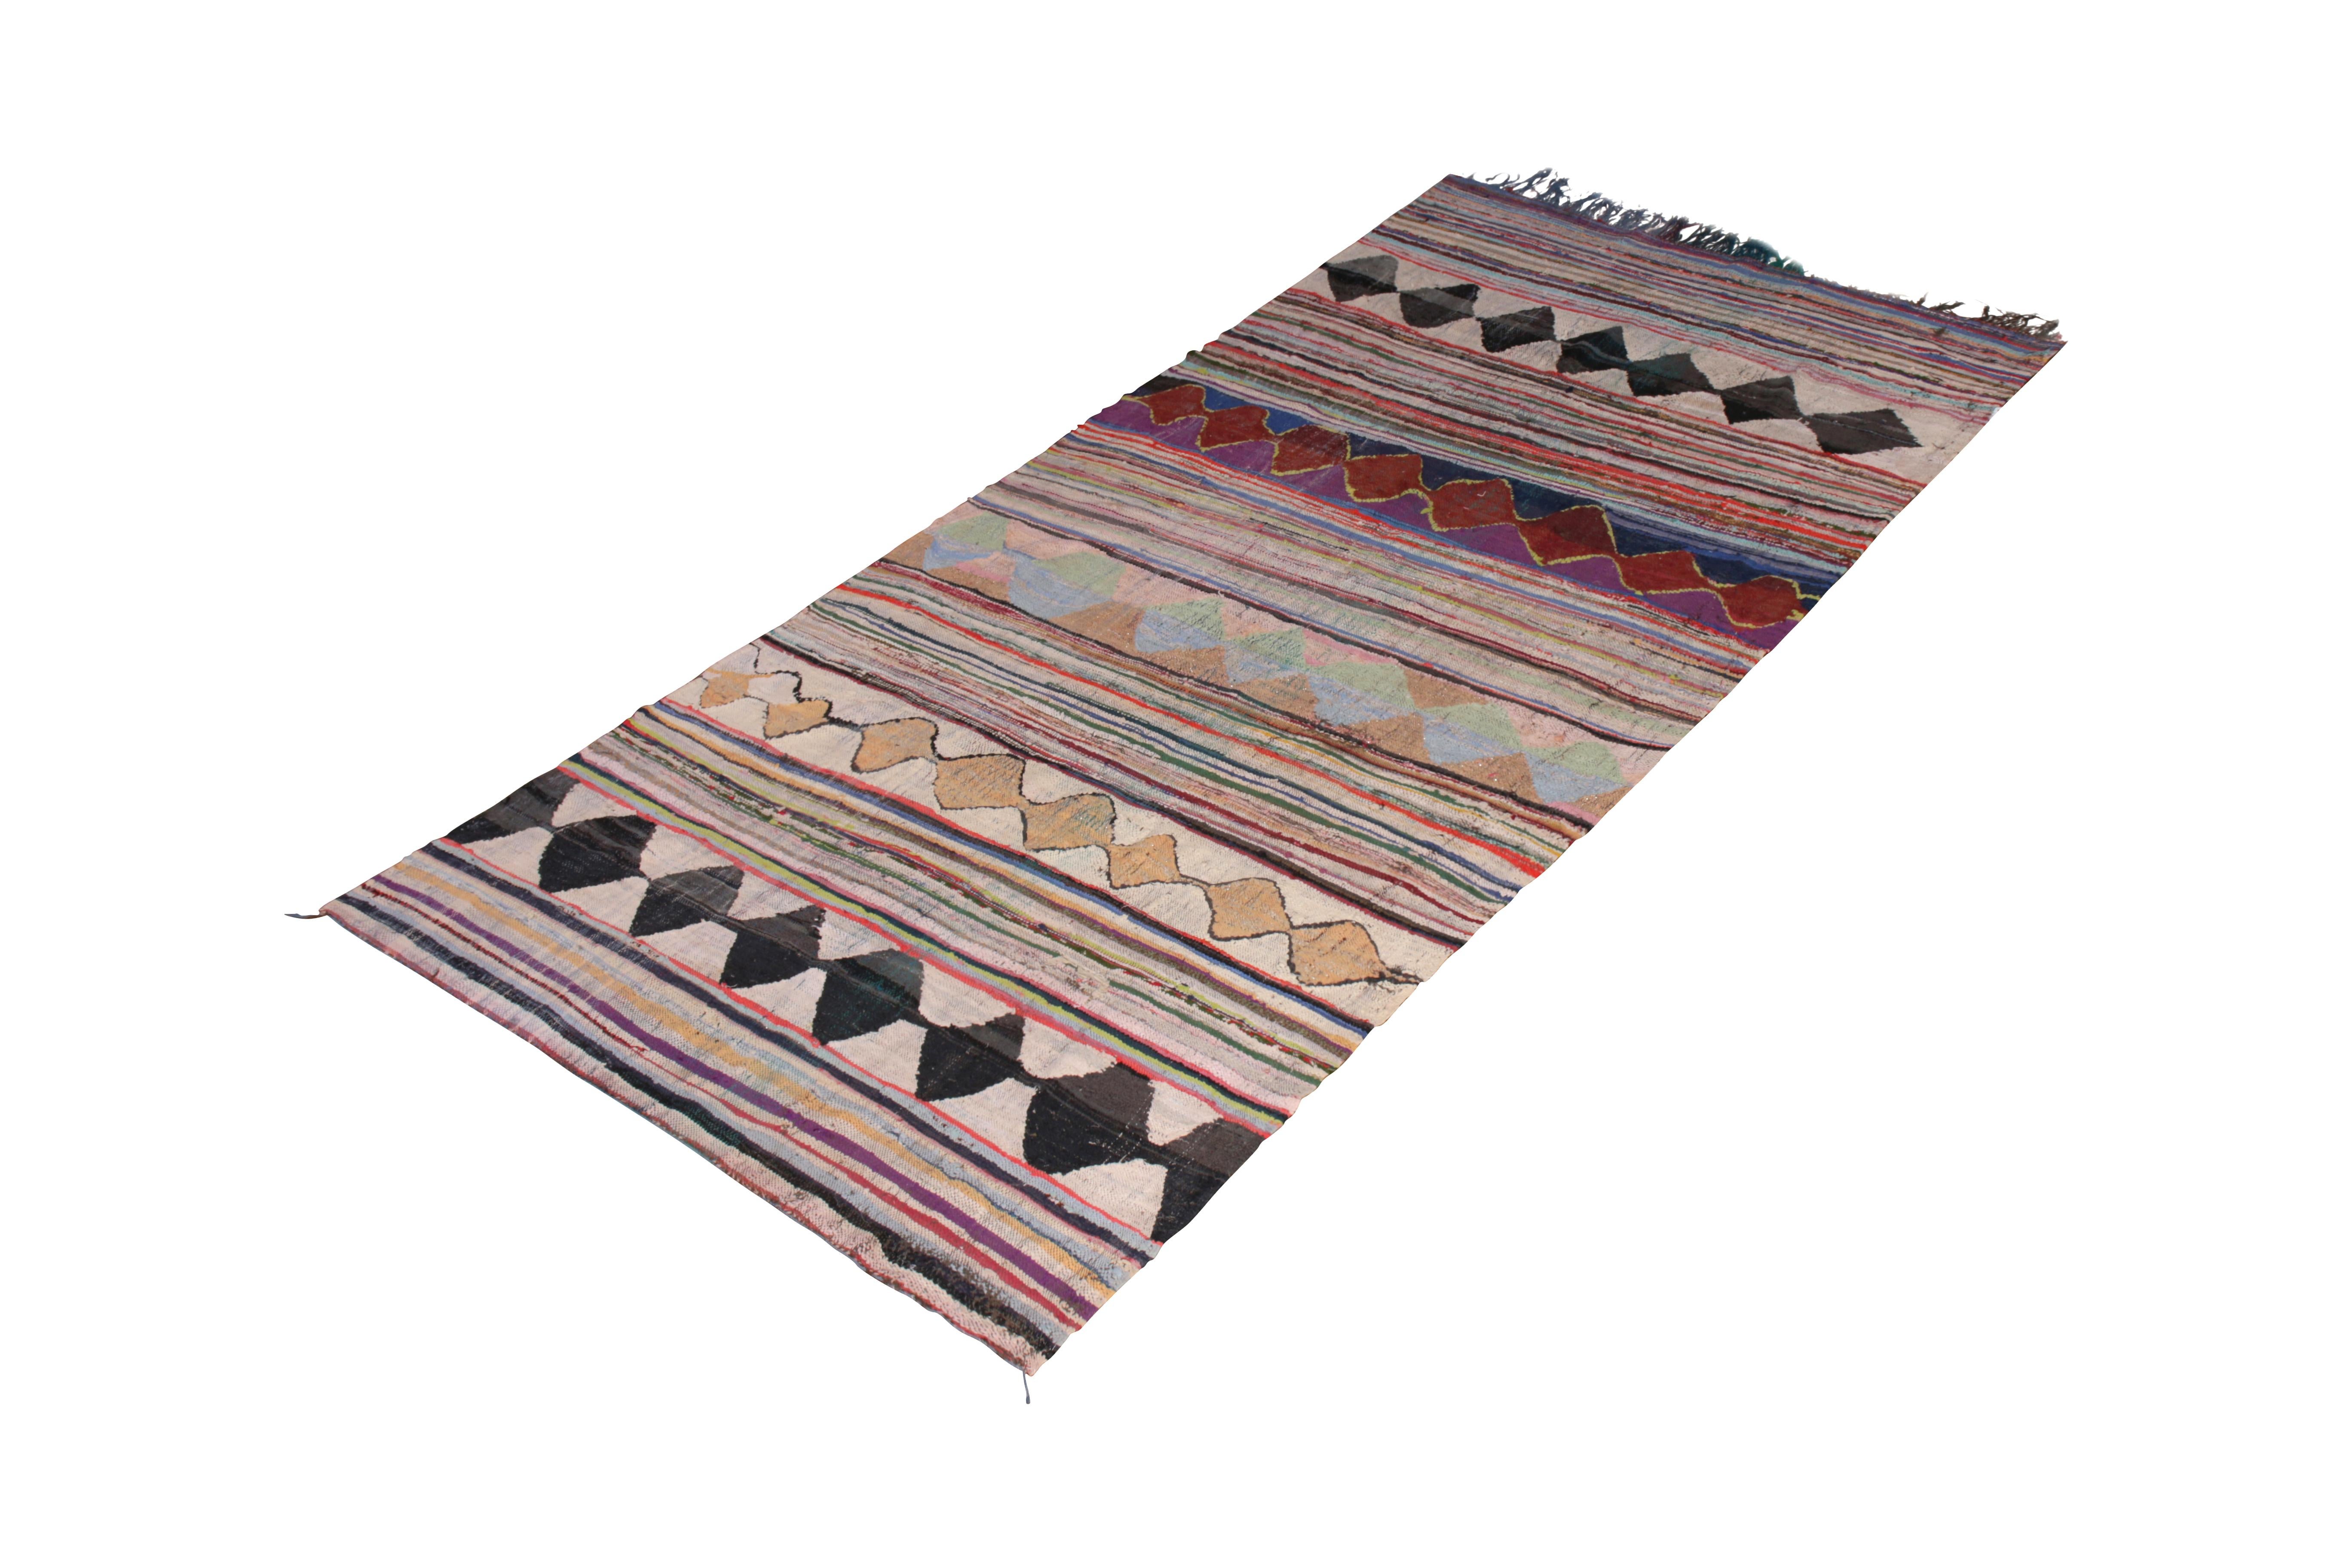 Hand knotted in Classic fabric originating from Morocco circa 1950-1960, this midcentury vintage Moroccan rug enjoys an ideal negotiation between bold patterns and joyful tones created through whimsical colorway; a juxtaposed play of a striped